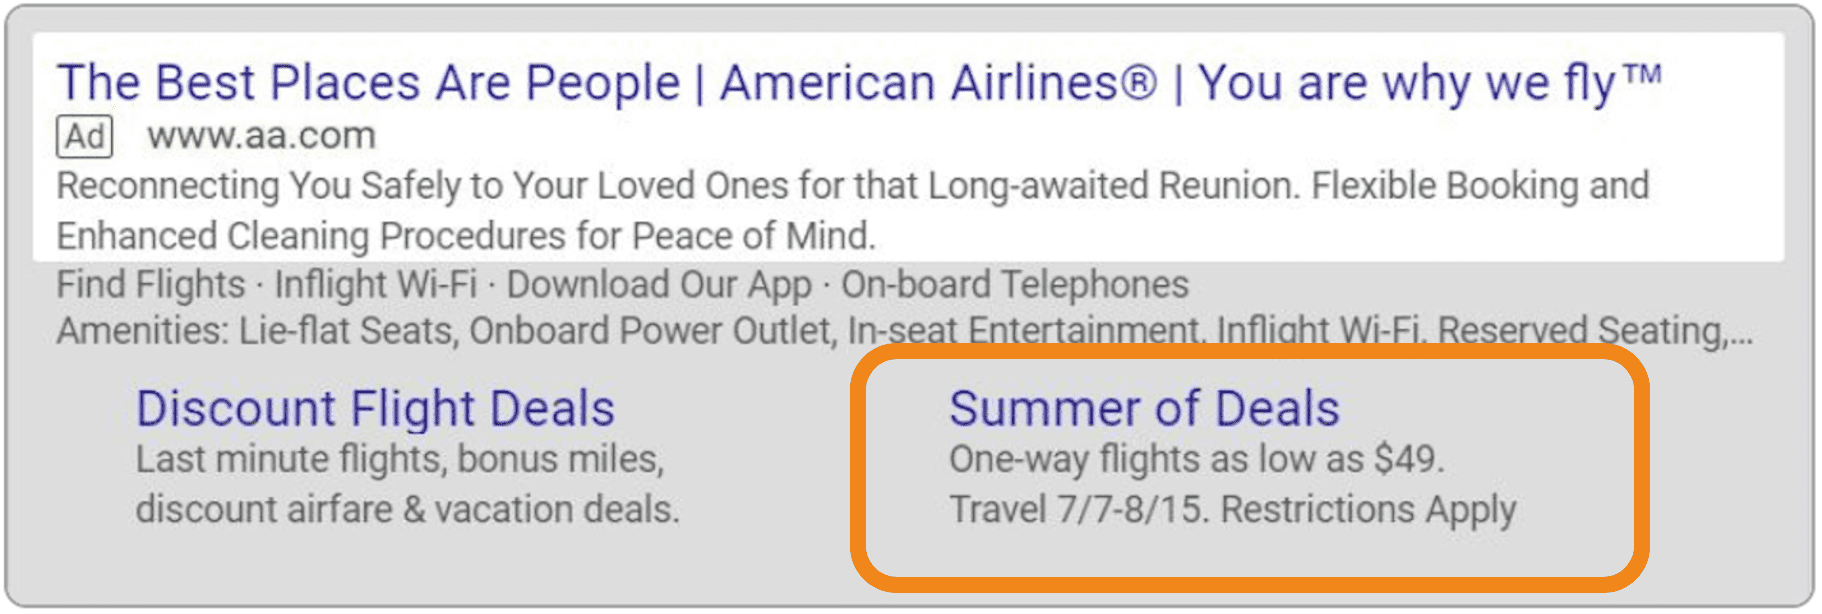 American Airlines Summer of deals airSEM